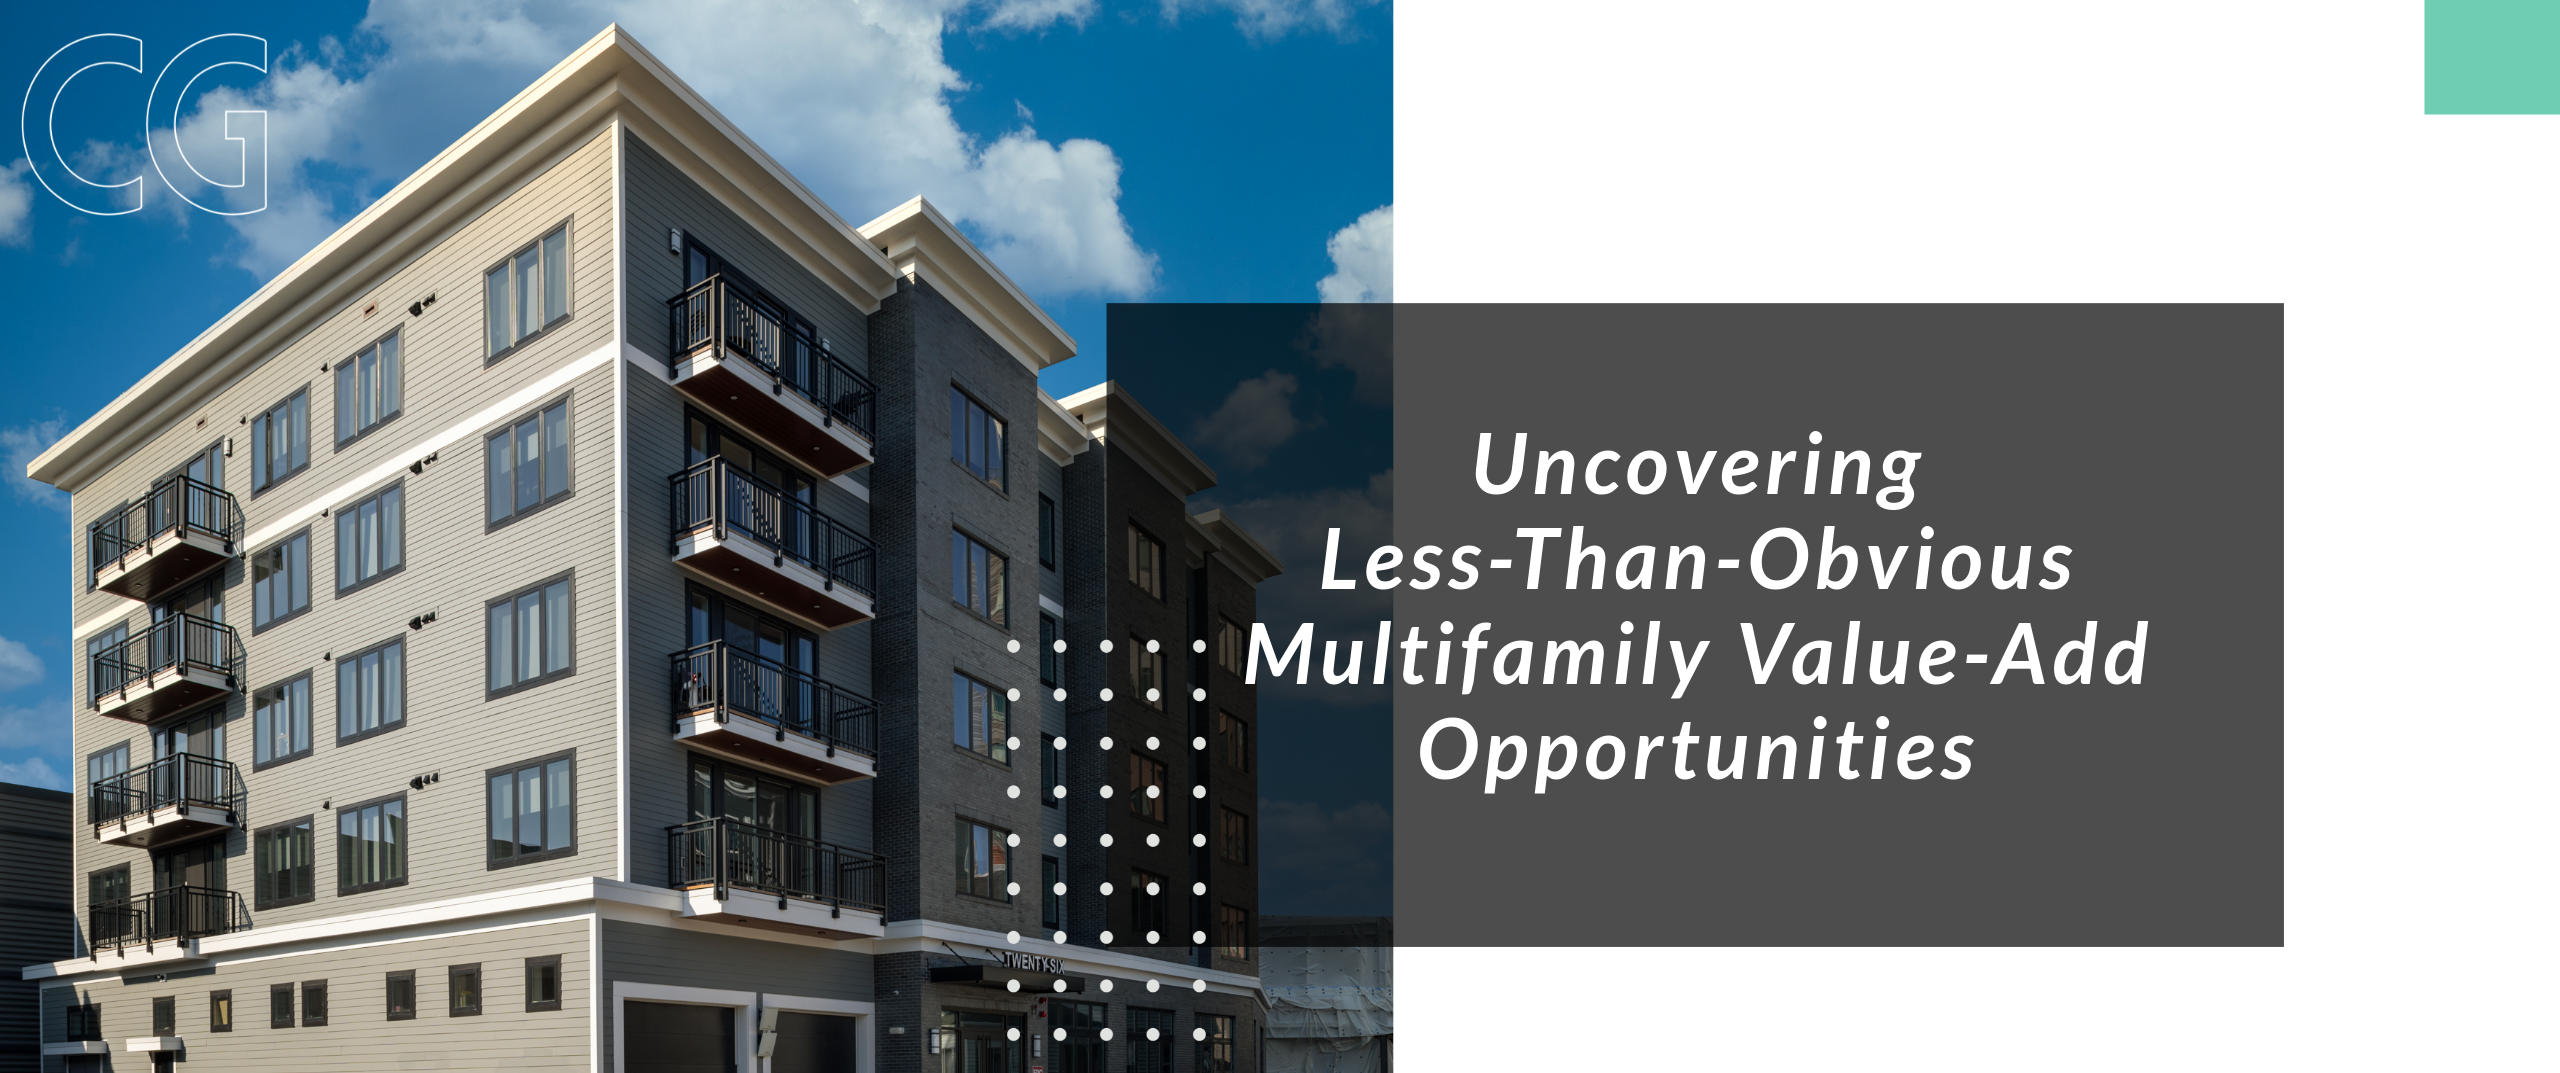 Uncovering Less-Than-Obvious Multifamily Value-Add Opportunities